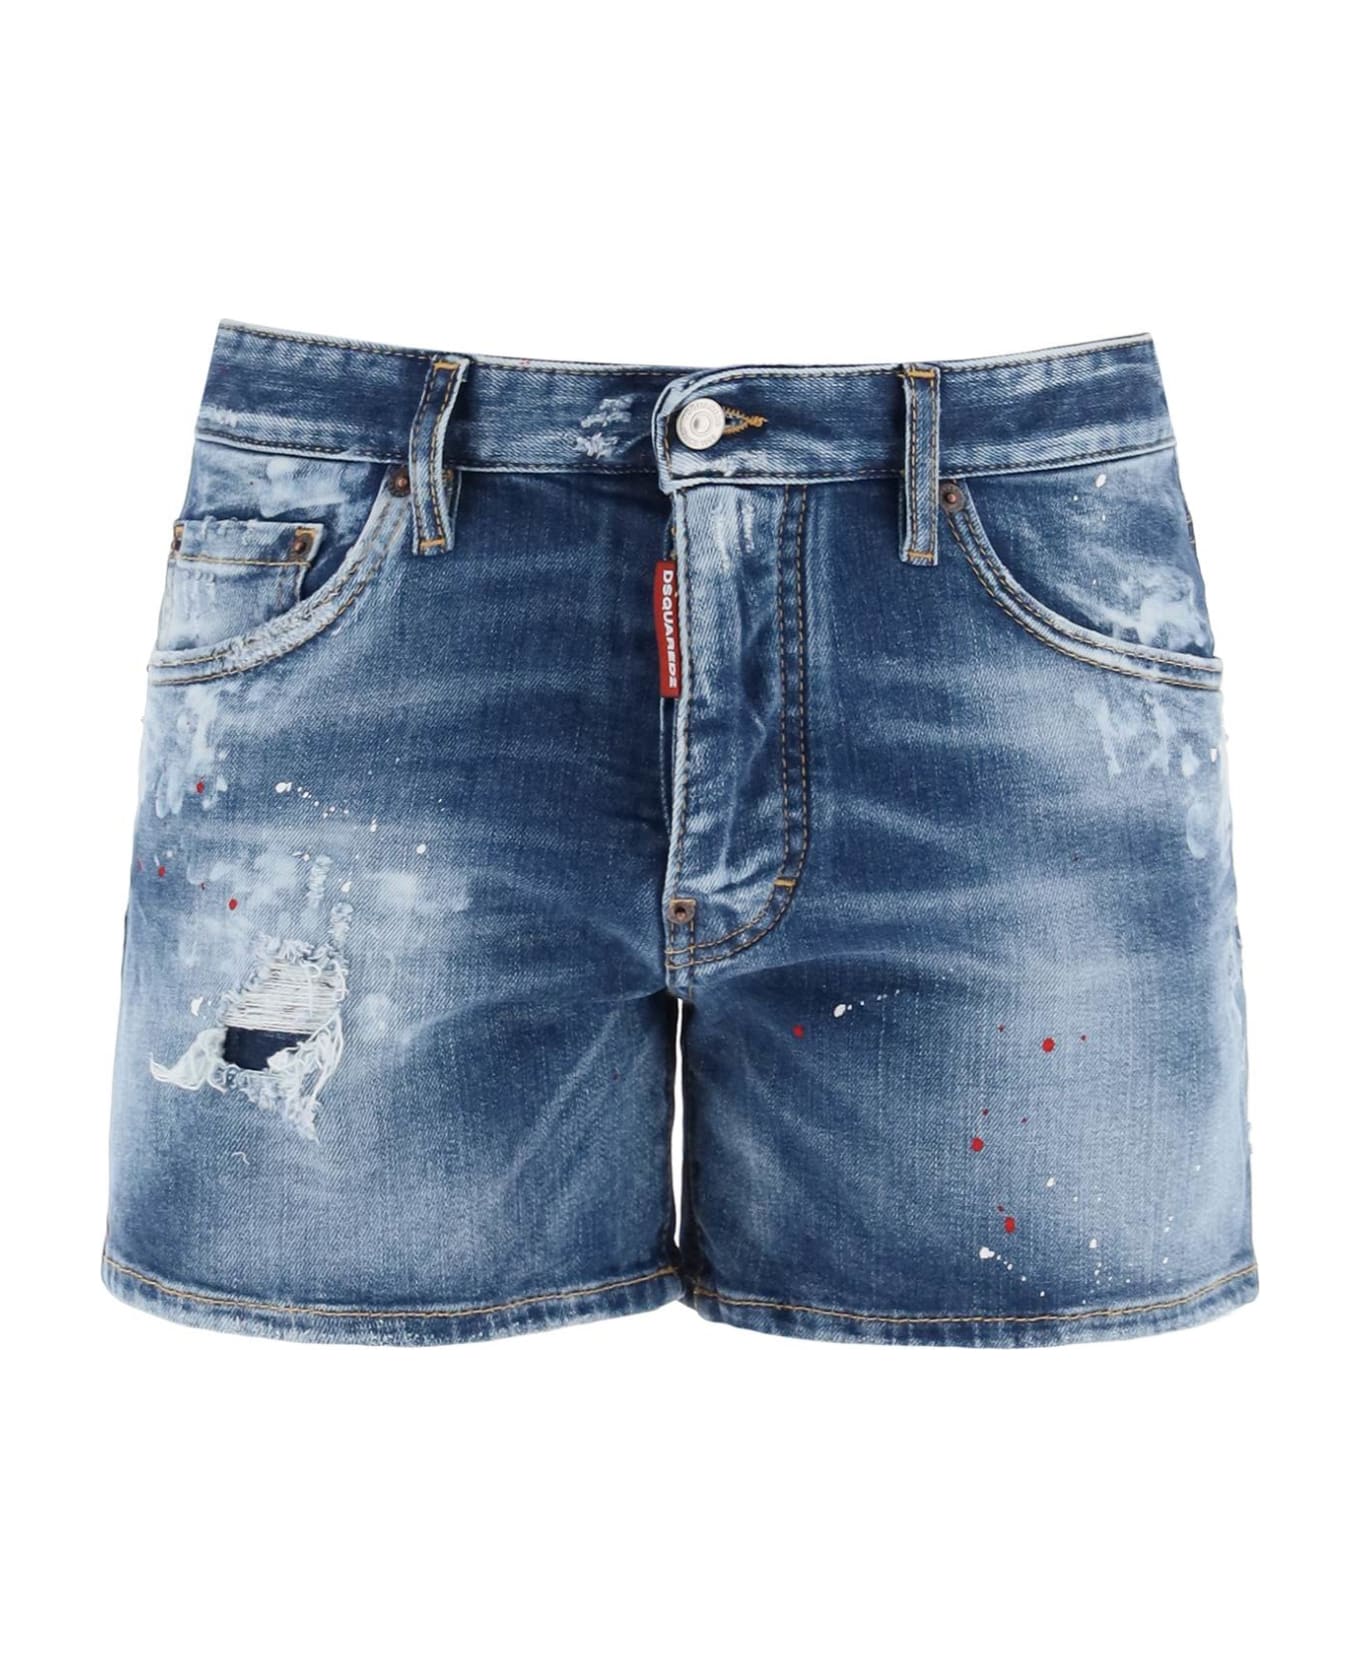 Dsquared2 Sexy 70's Shorts In Worn Out Booty Denim - NAVY BLUE (Blue)